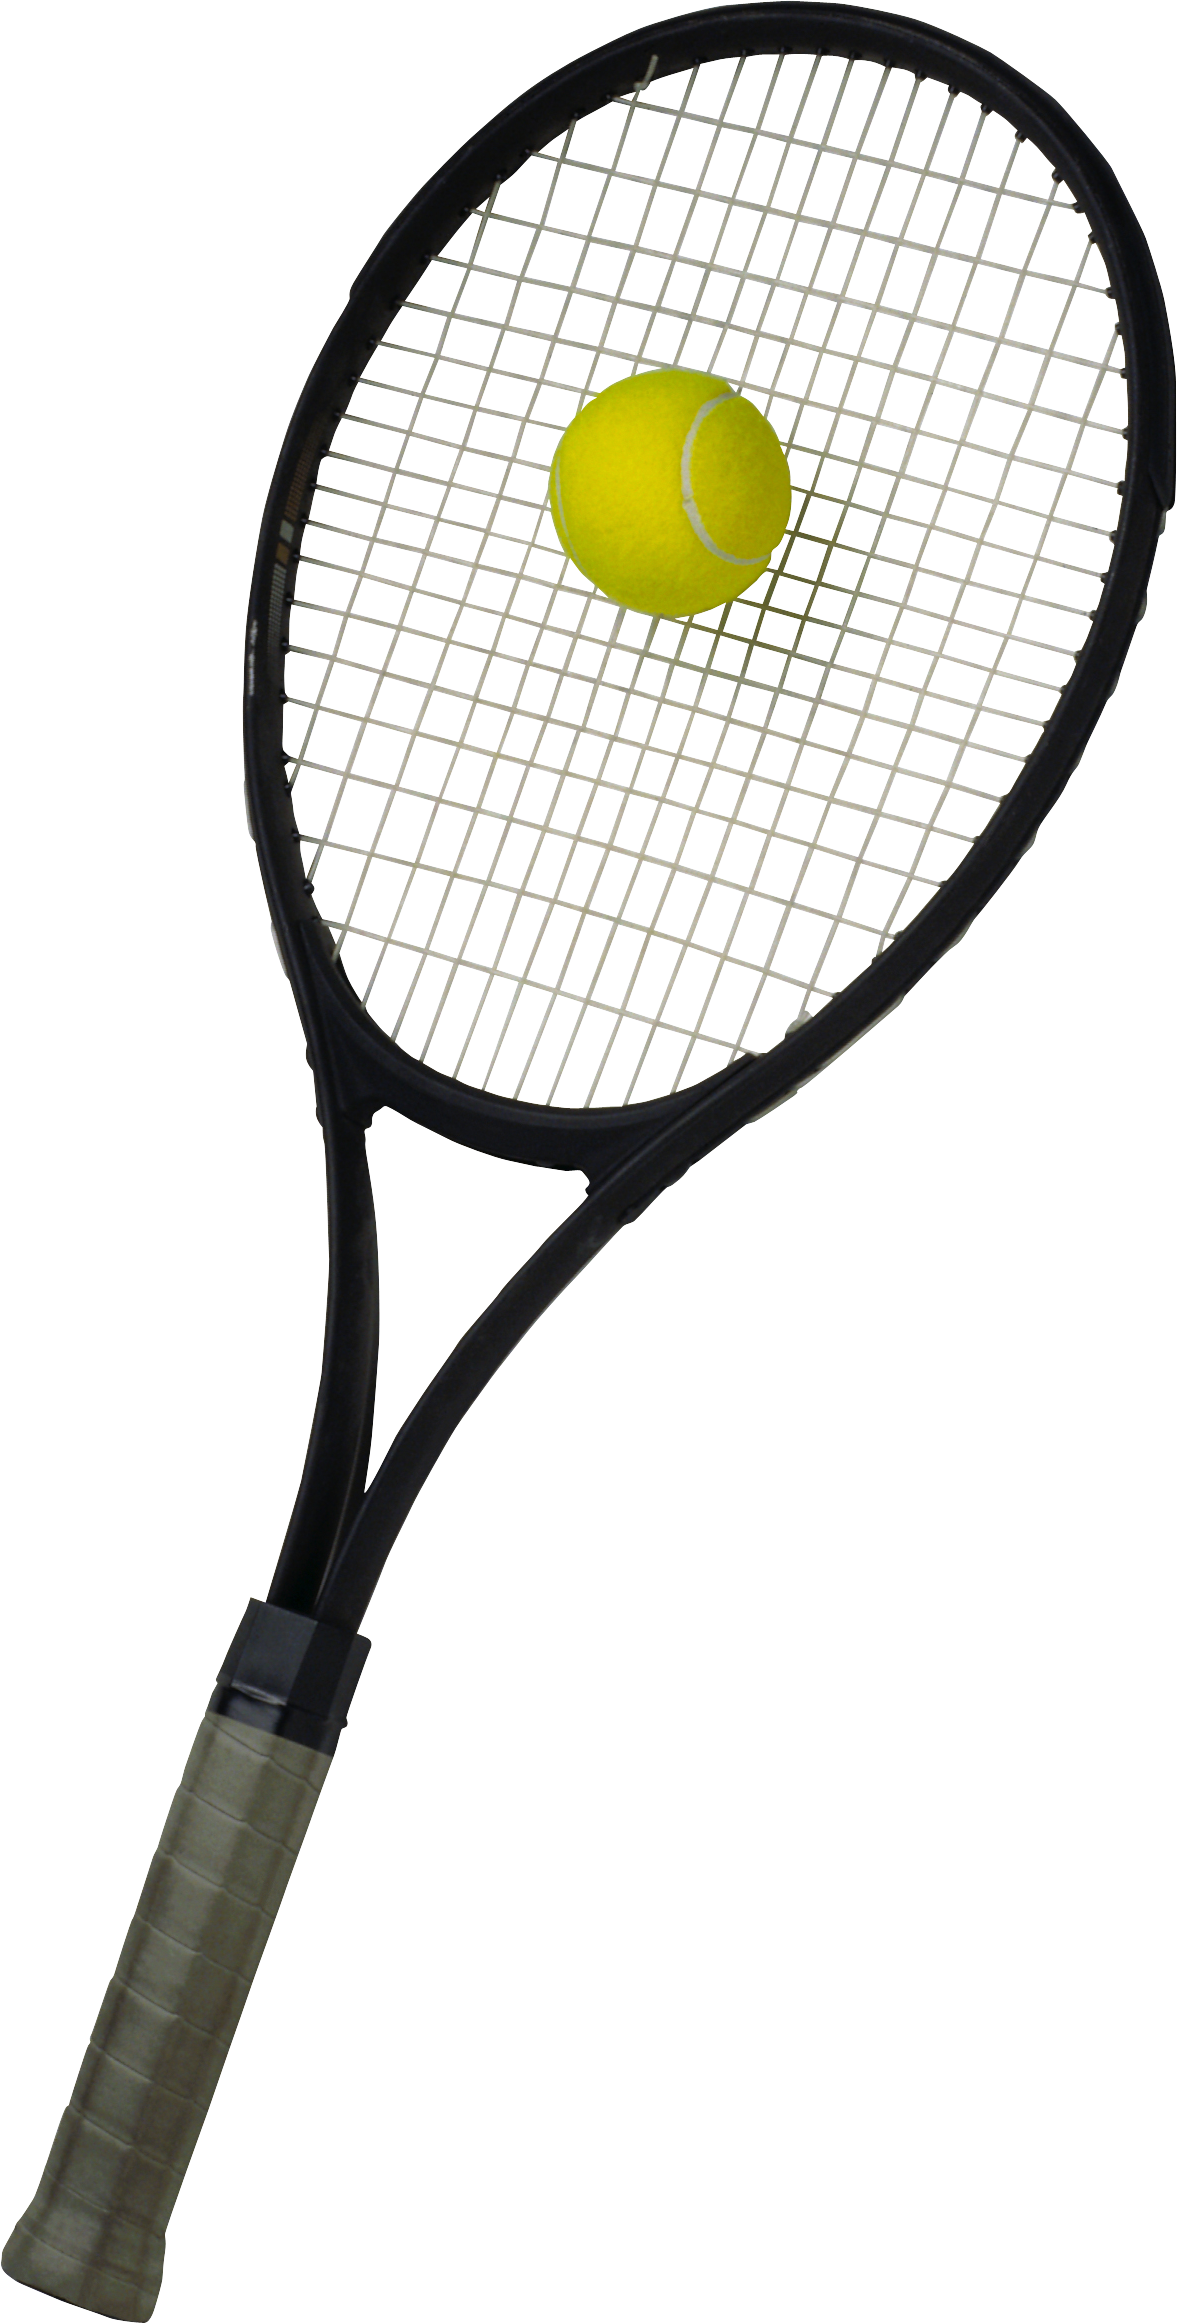 Detail Tennis Racket And Ball Images Nomer 15